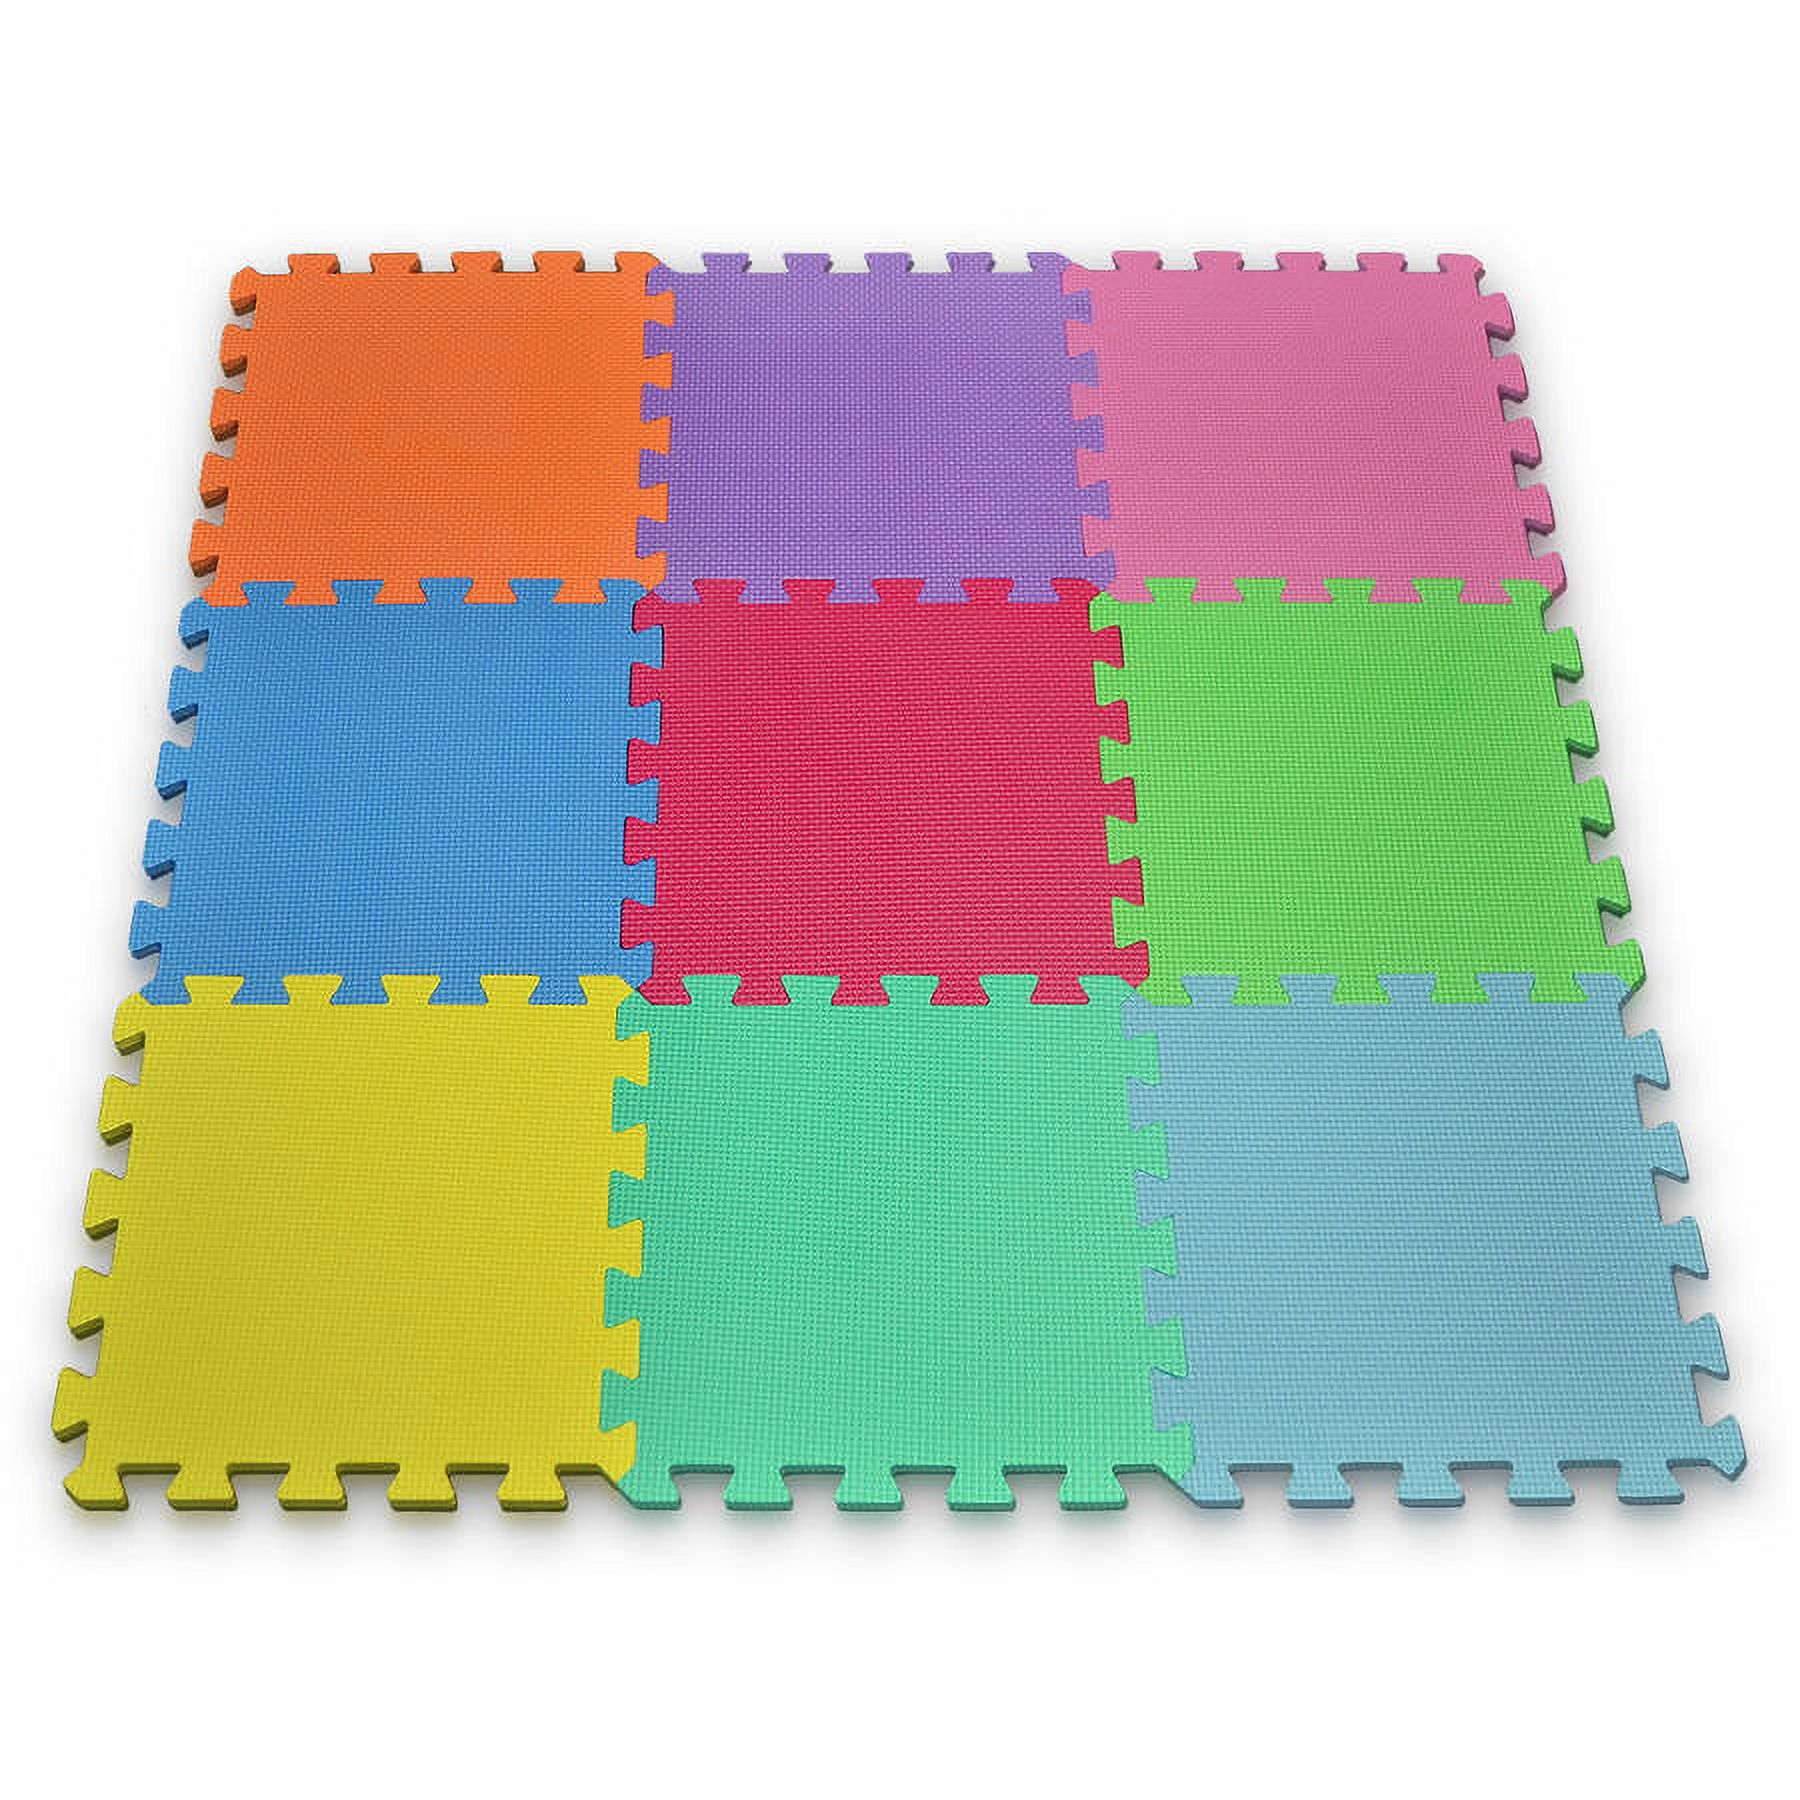 Matney Foam Floor Puzzle-Piece Play Mat, Great for Kids to Learn and Play, 9 Tile Pieces - image 4 of 6